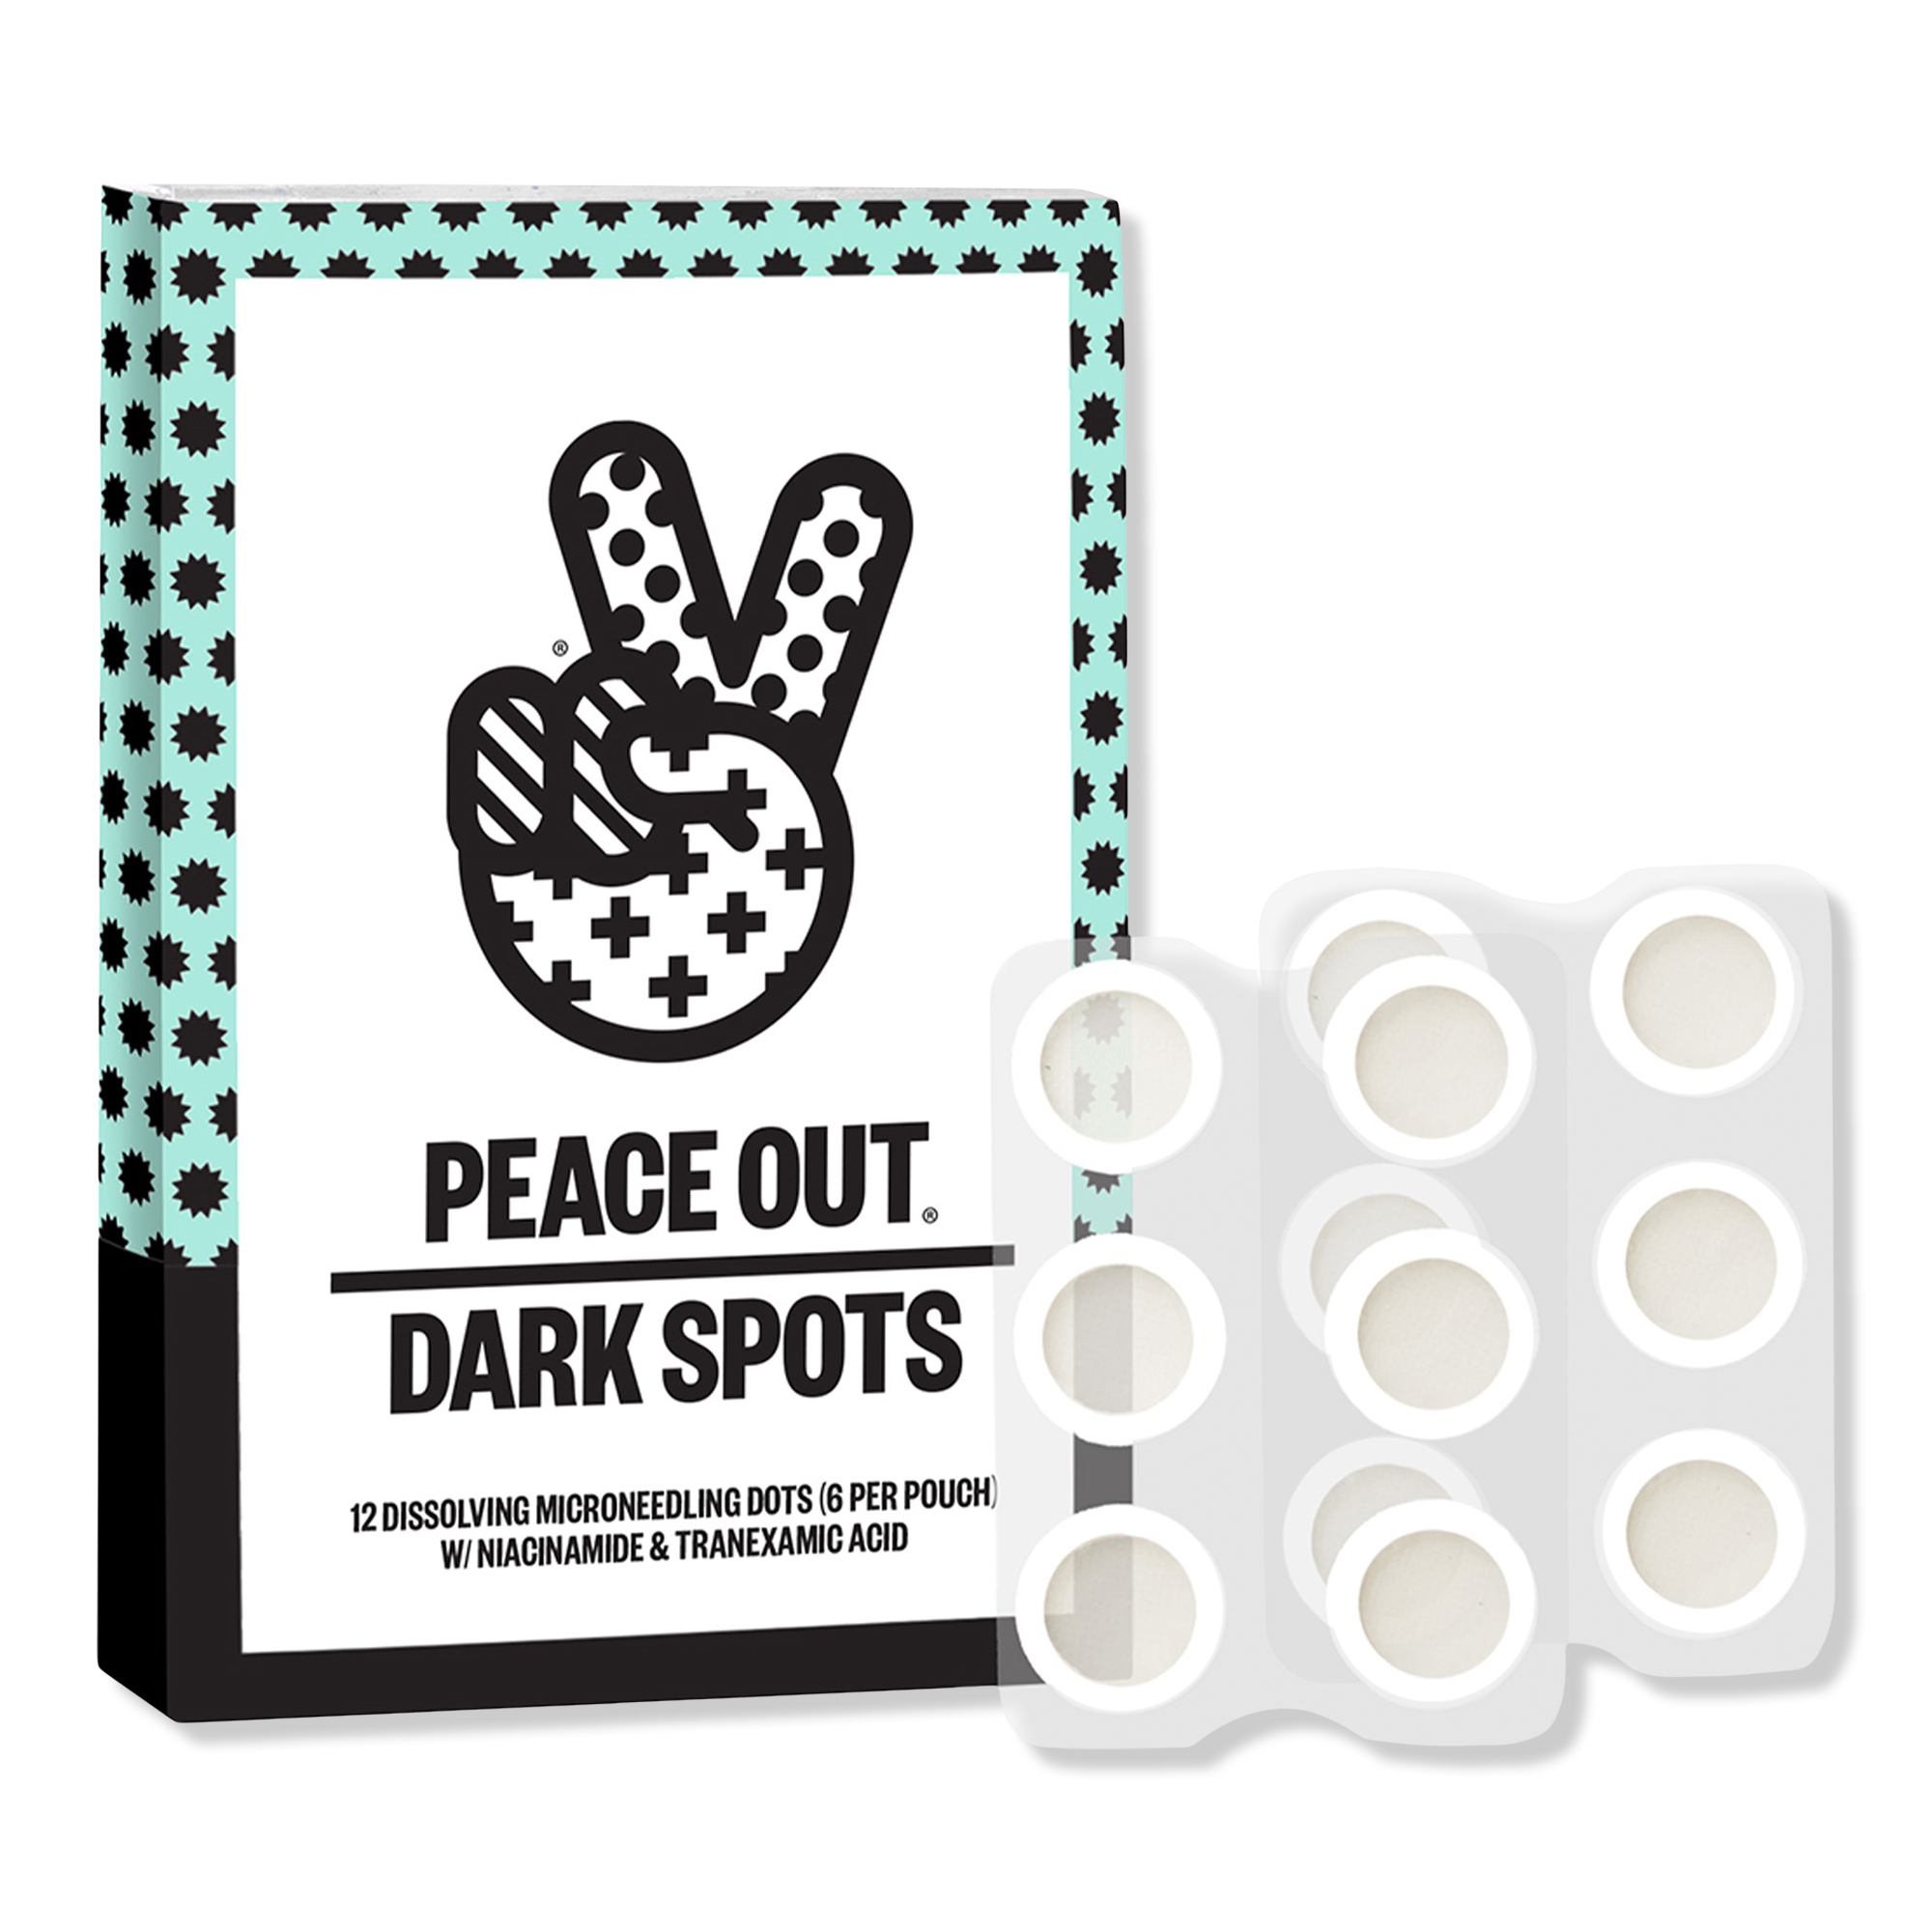 PEACE OUT DARK SPOTS MICRONEEDLING BRIGHTENING DOTS INTERNATIONAL SHIPPING